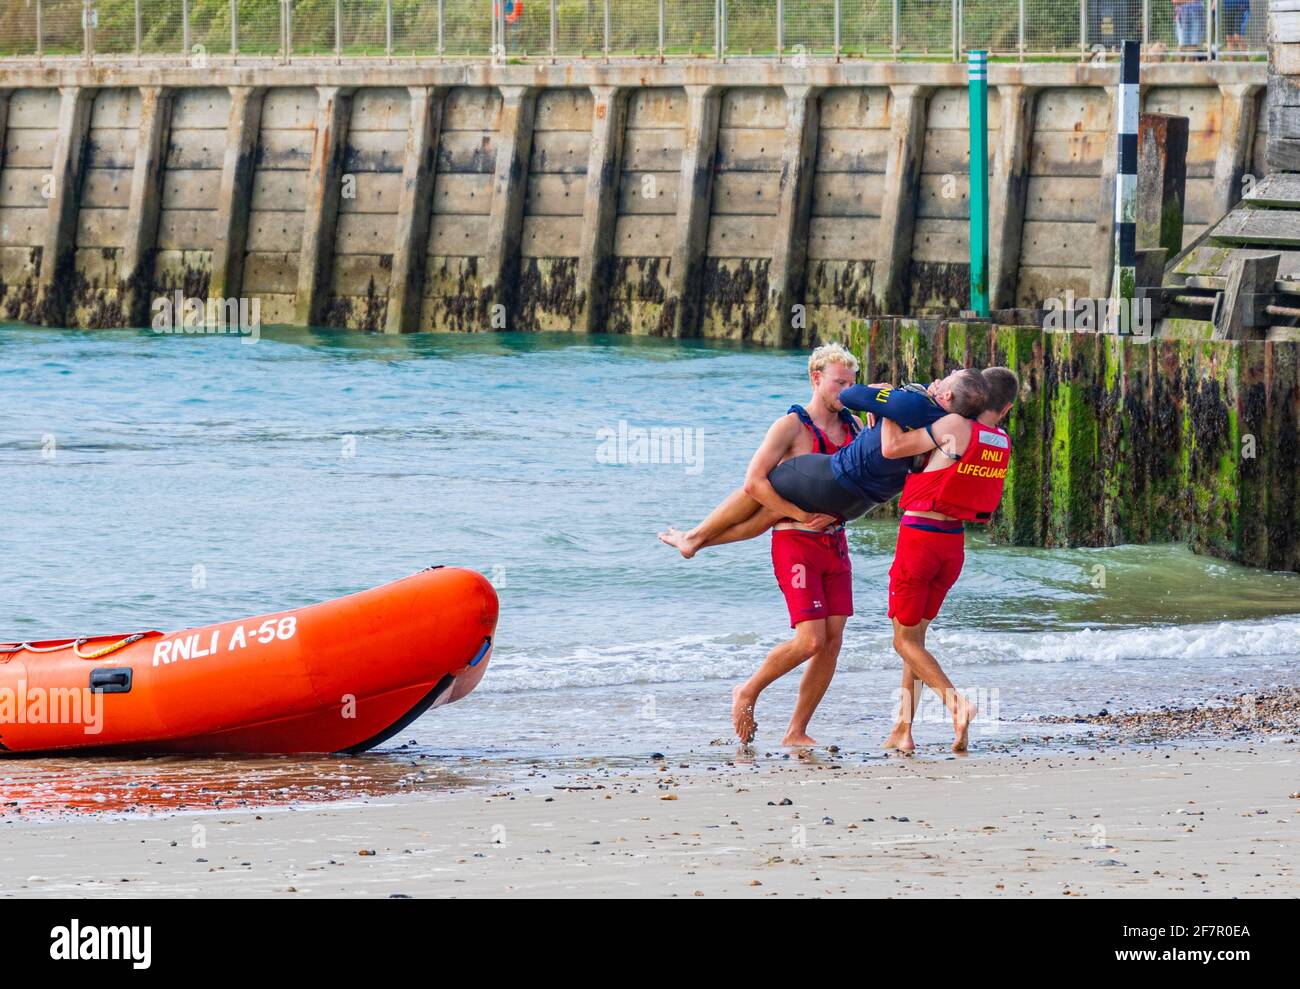 Lifeguards doing medical lifeguard training on a beach, showing someone playing an injured patient being rescued & carried from the sea, in the UK. Stock Photo